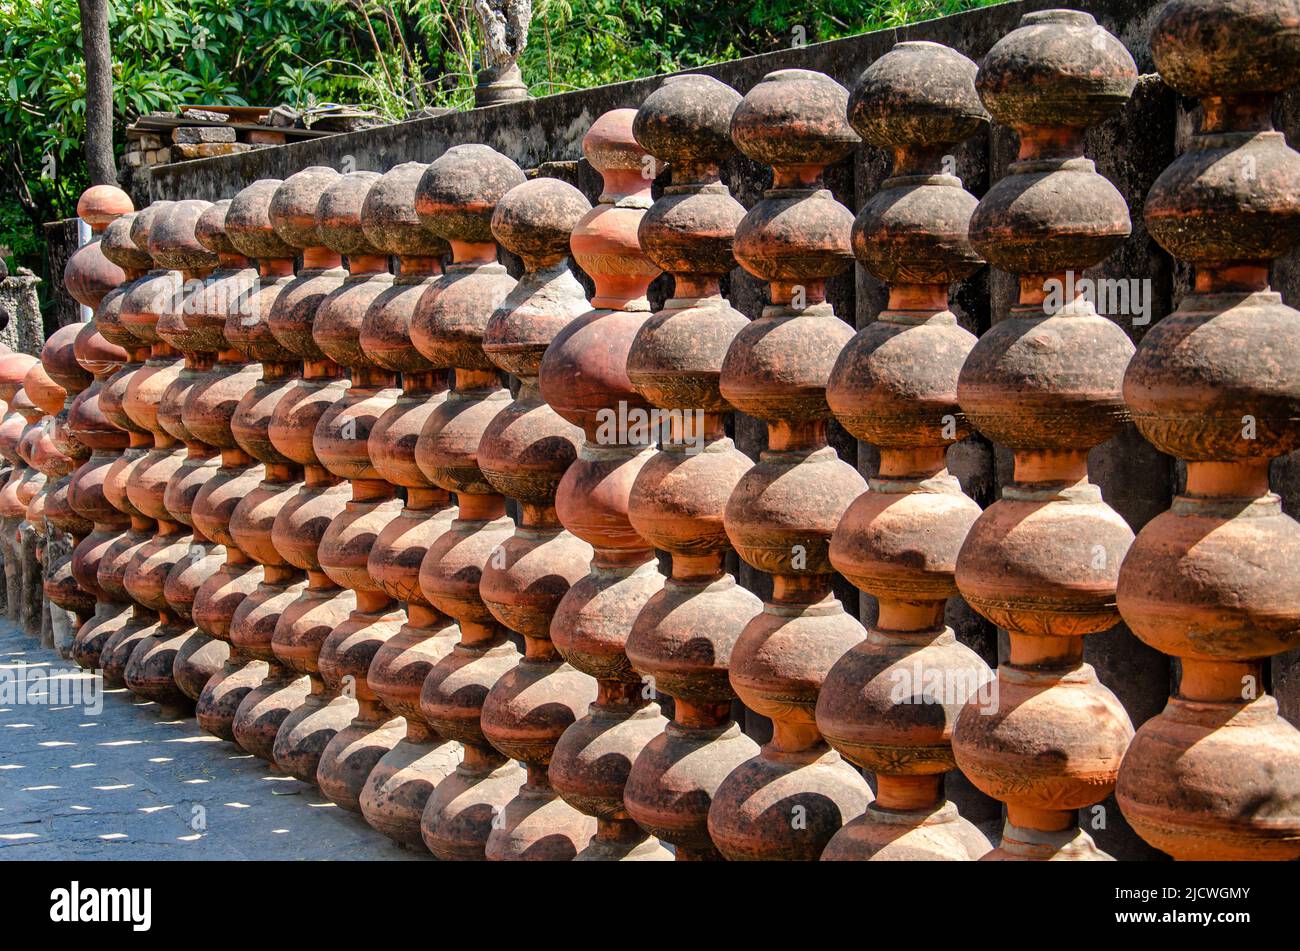 Rock garden situated at Chandigarh, India Stock Photo